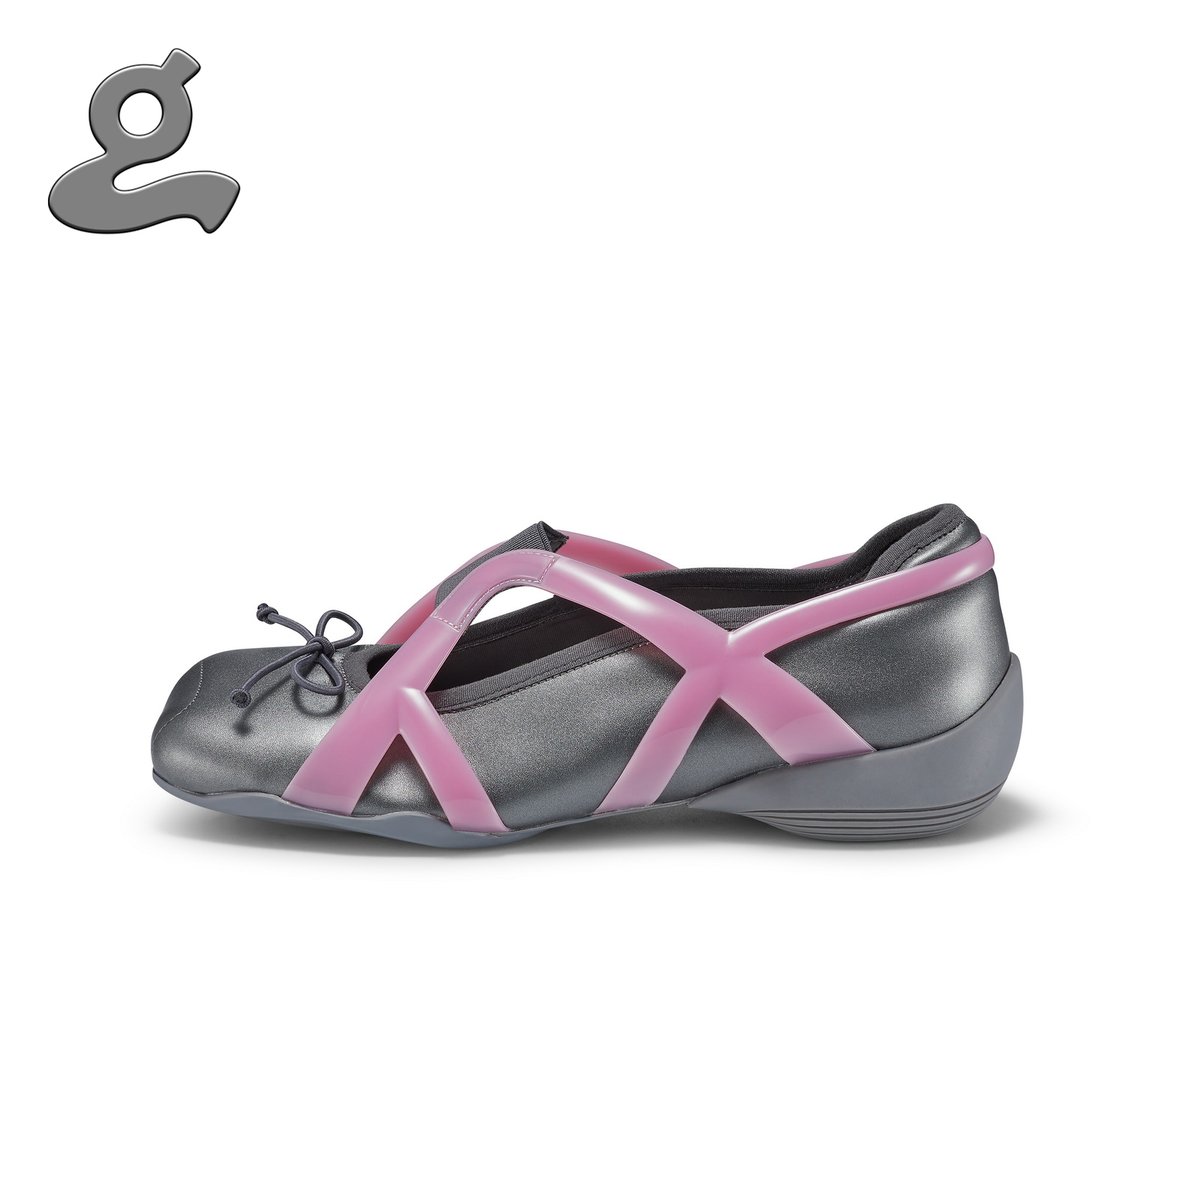 Image of Bow Tie Ballet Flats (Pink/Grey)